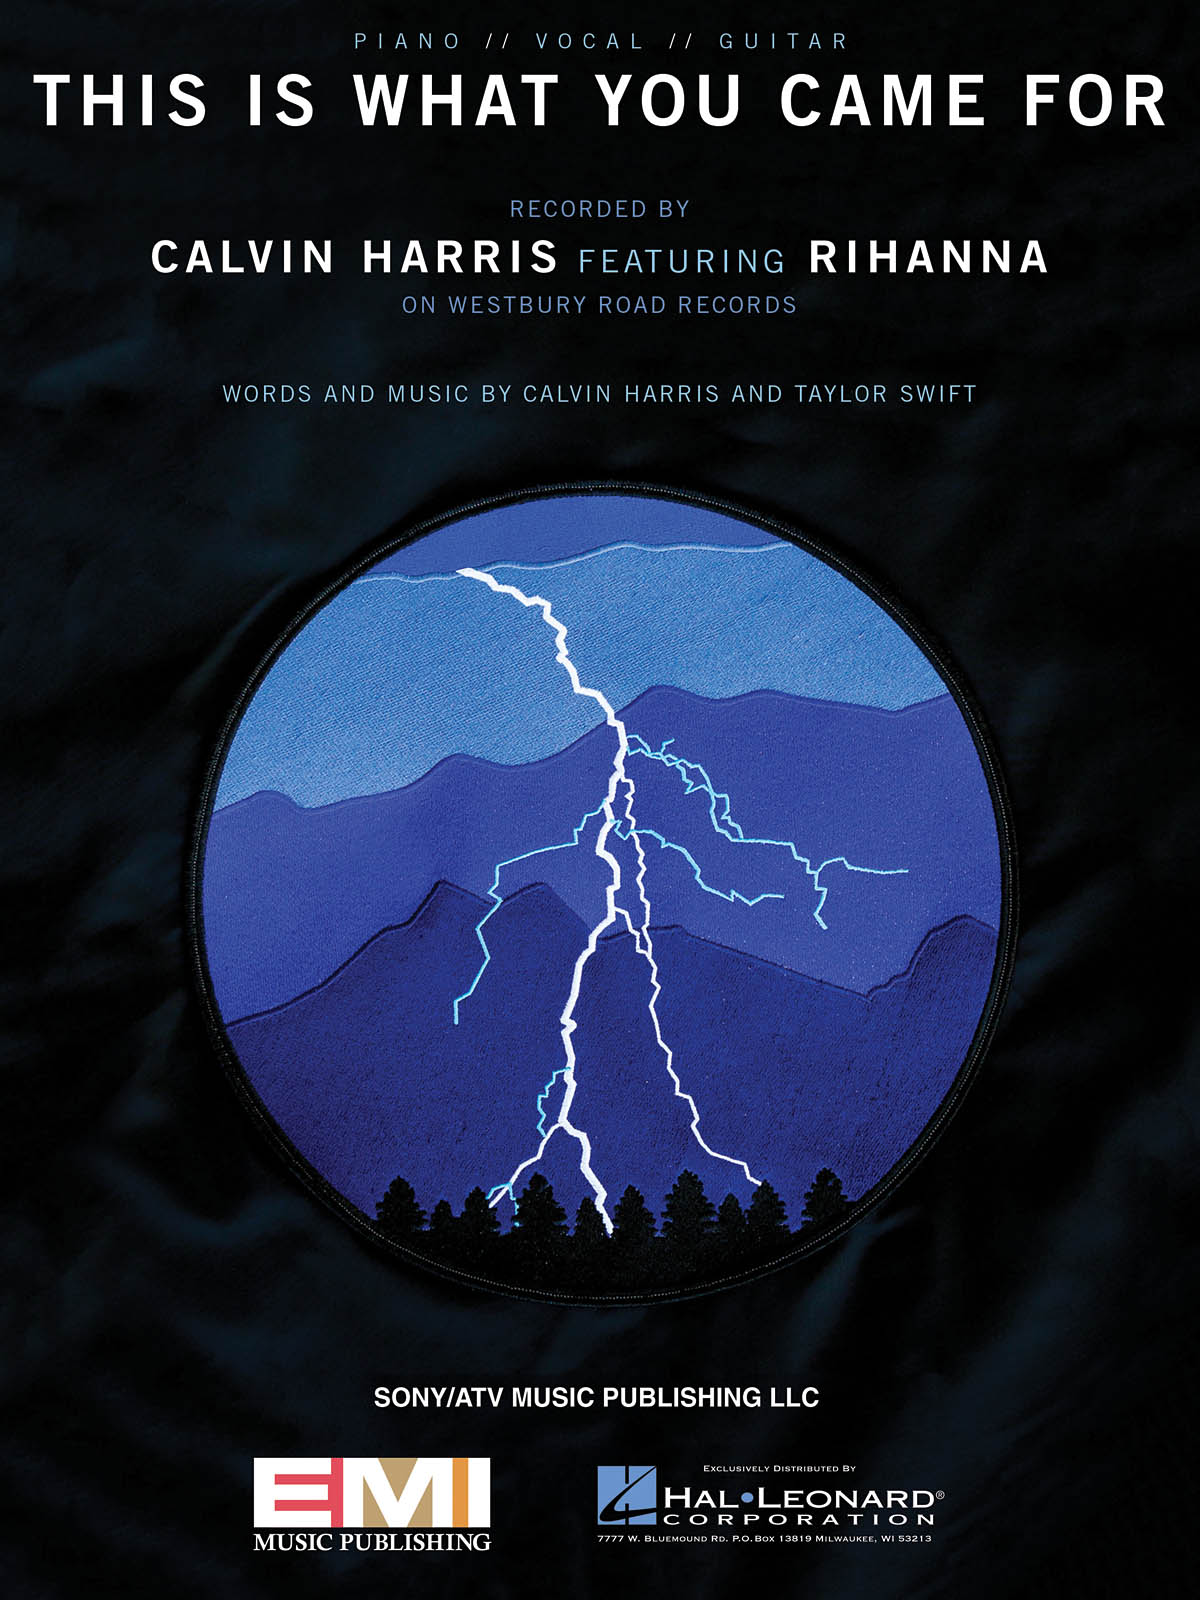 Calvin Harris  Rihanna: This Is What You Came For: Piano  Vocal and Guitar: